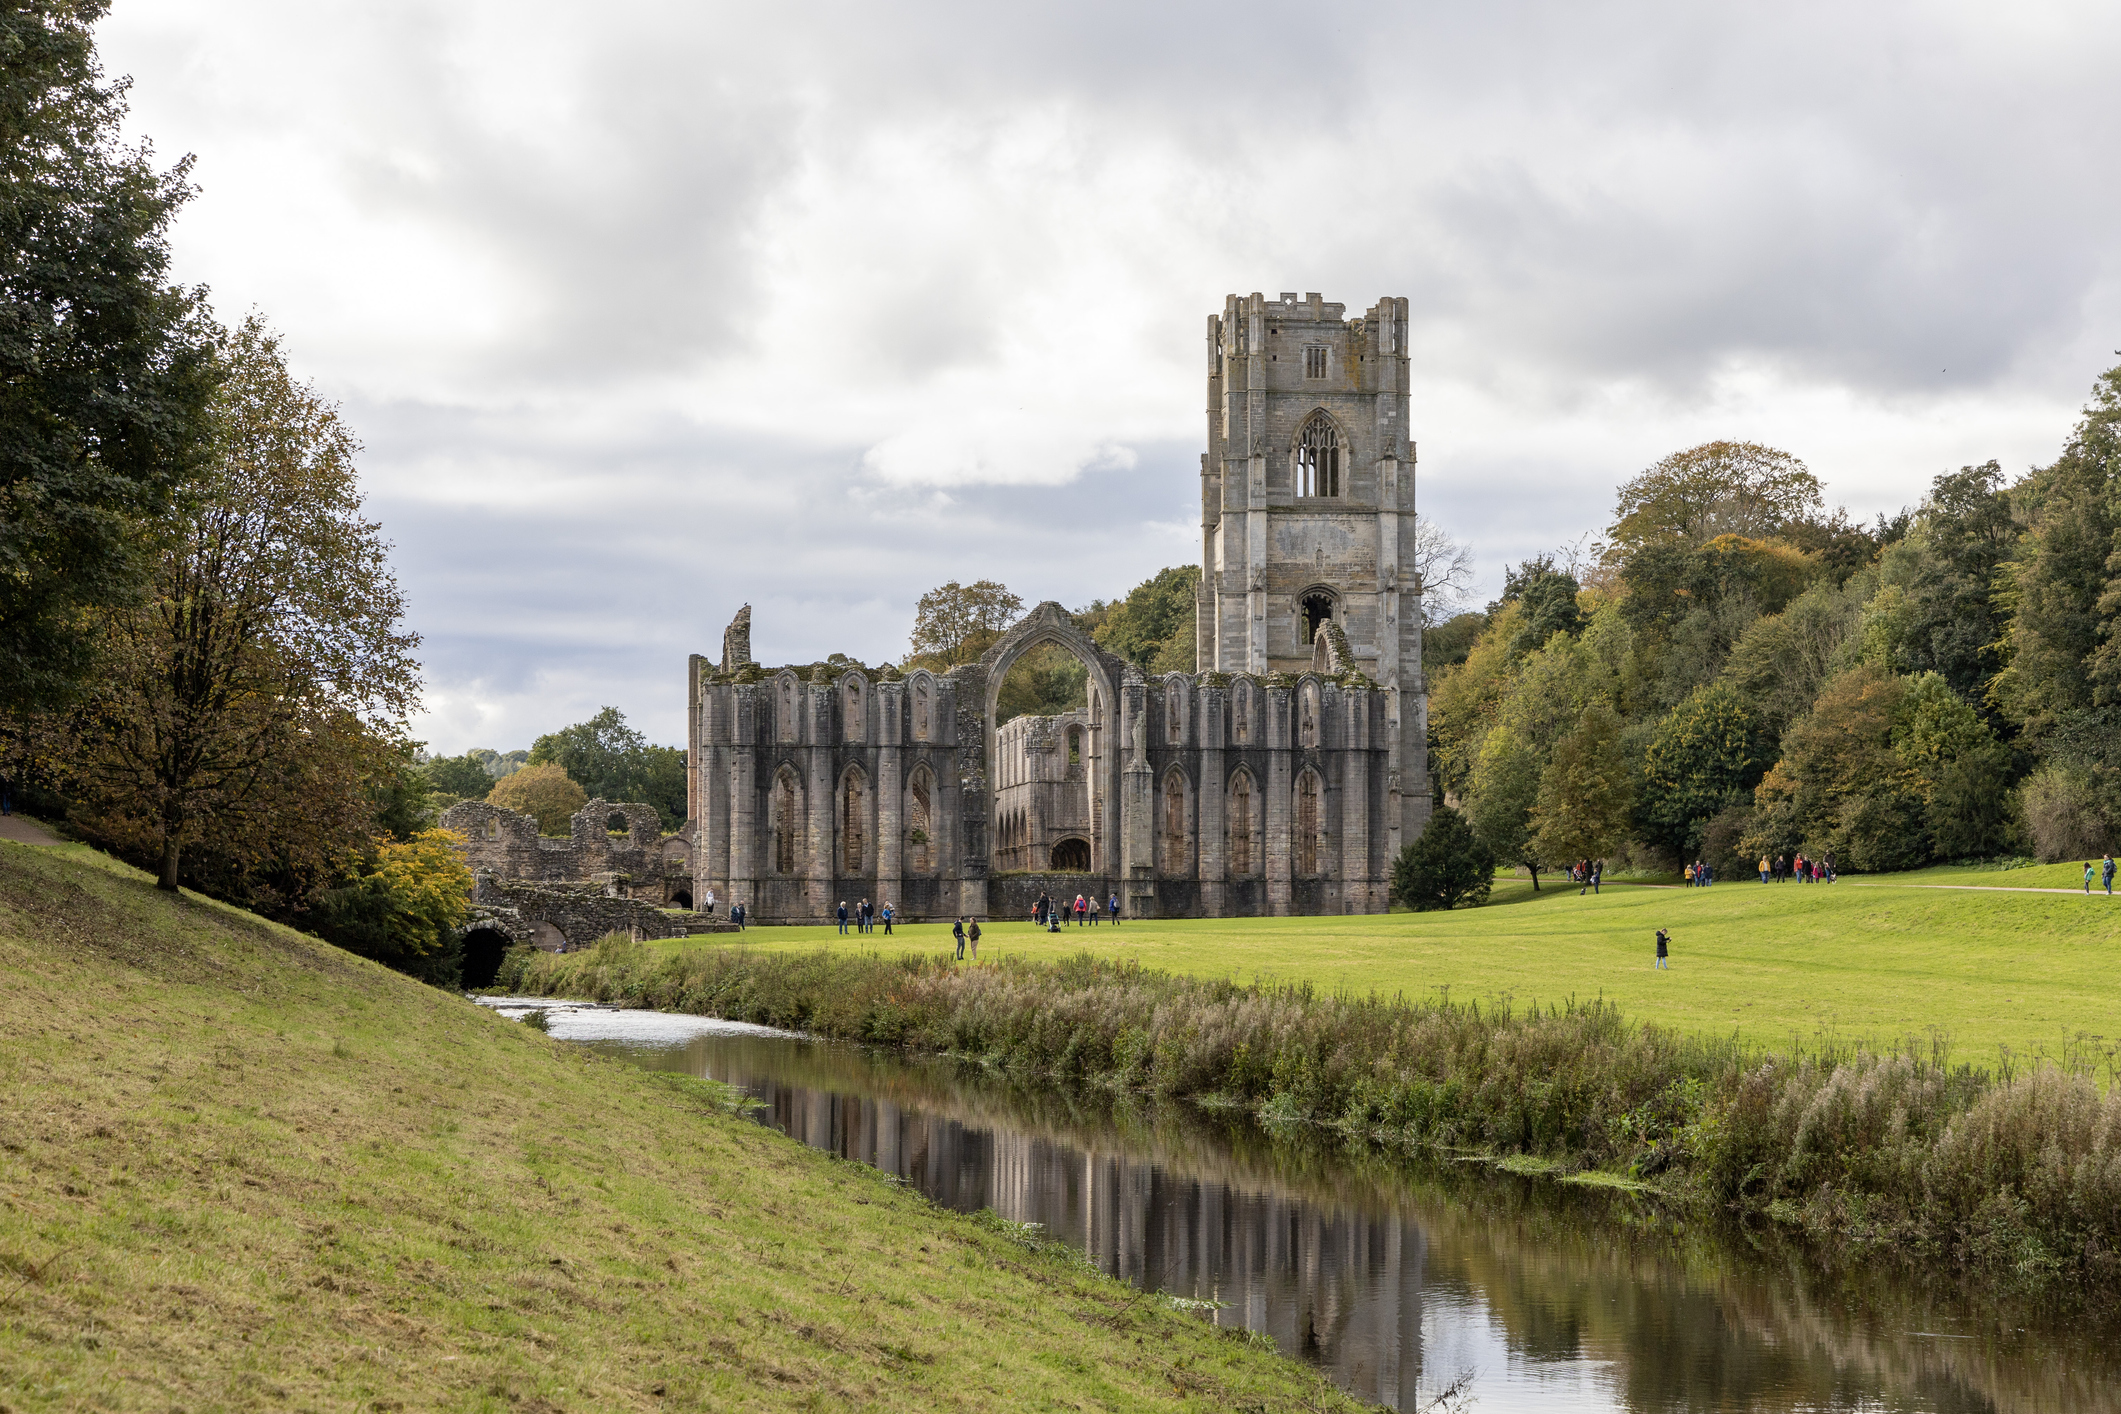 Fountains Abbey has suffered extensive damage from flooding, which the Skell Valley Project hopes to prevent.